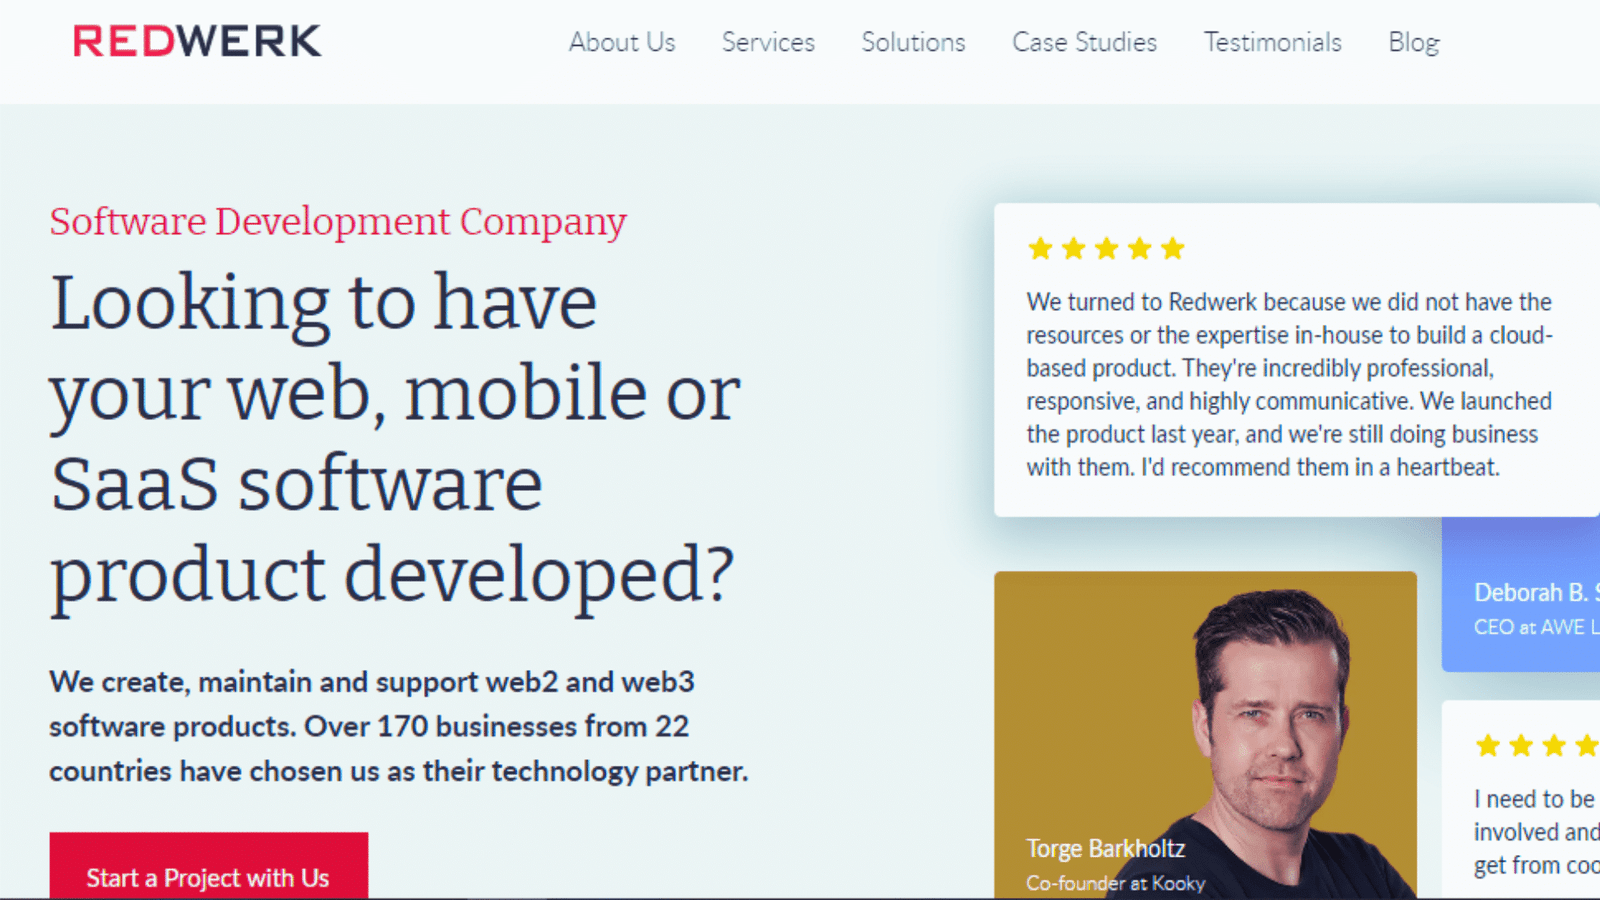 Redwerk: A One-Stop Shop for Your Software Development Needs